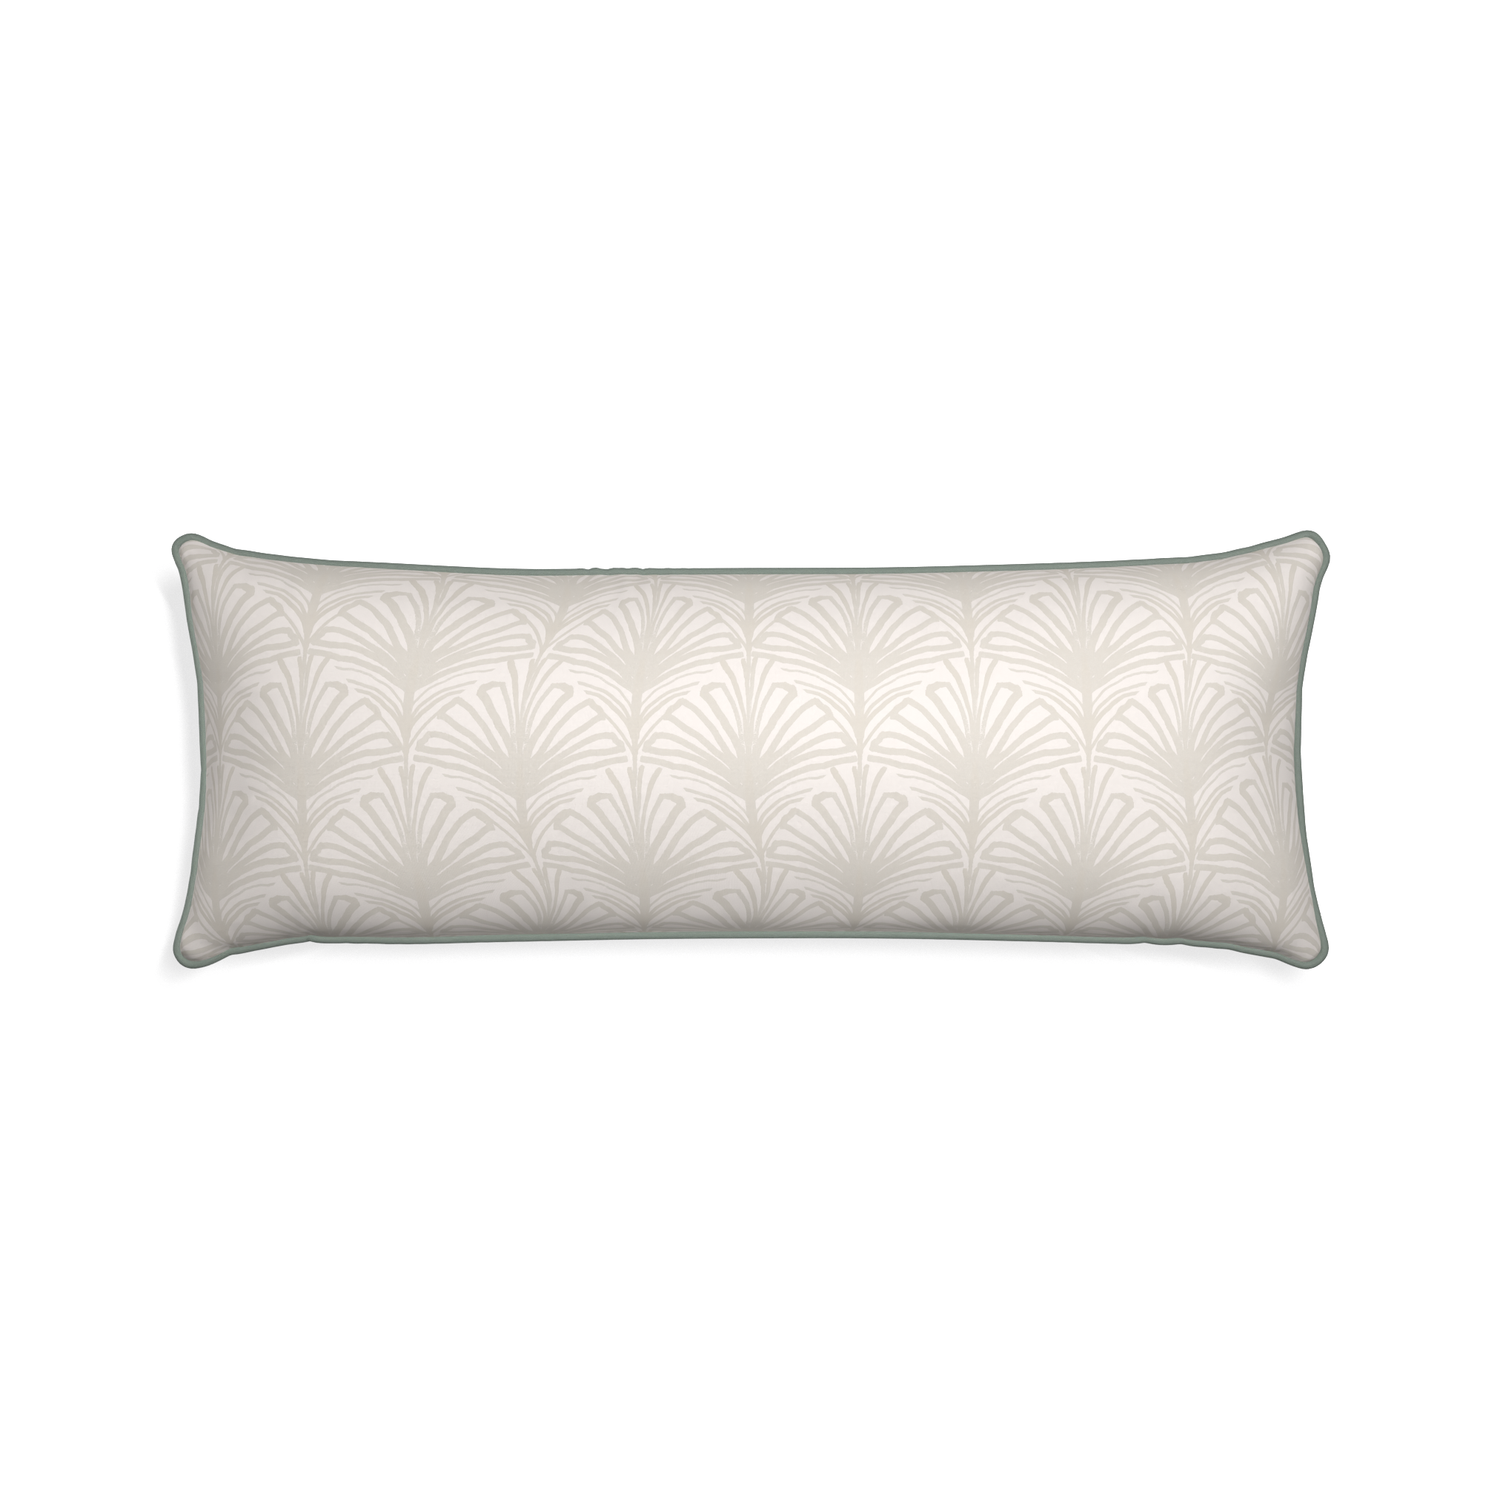 Xl-lumbar suzy sand custom beige palmpillow with sage piping on white background